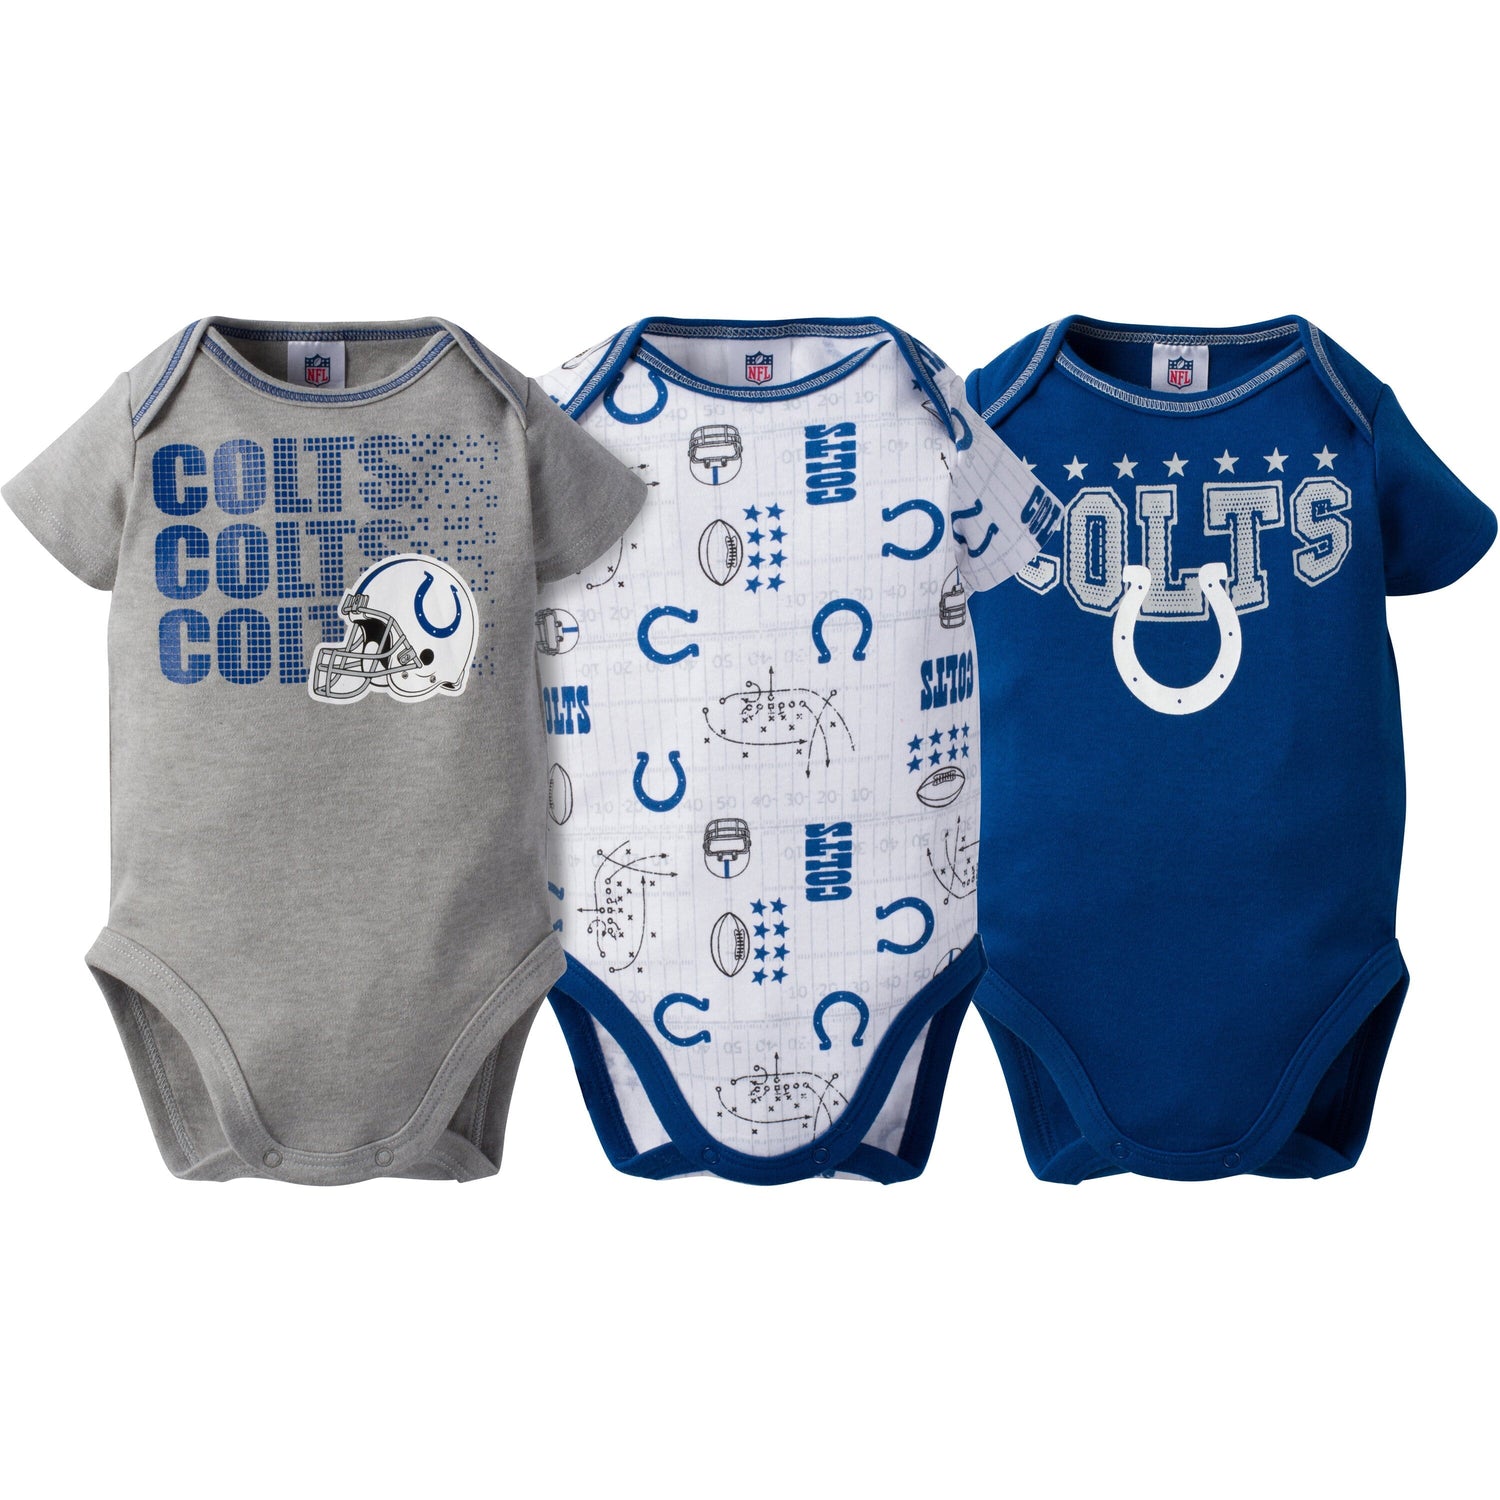 indianapolis colts infant jersey